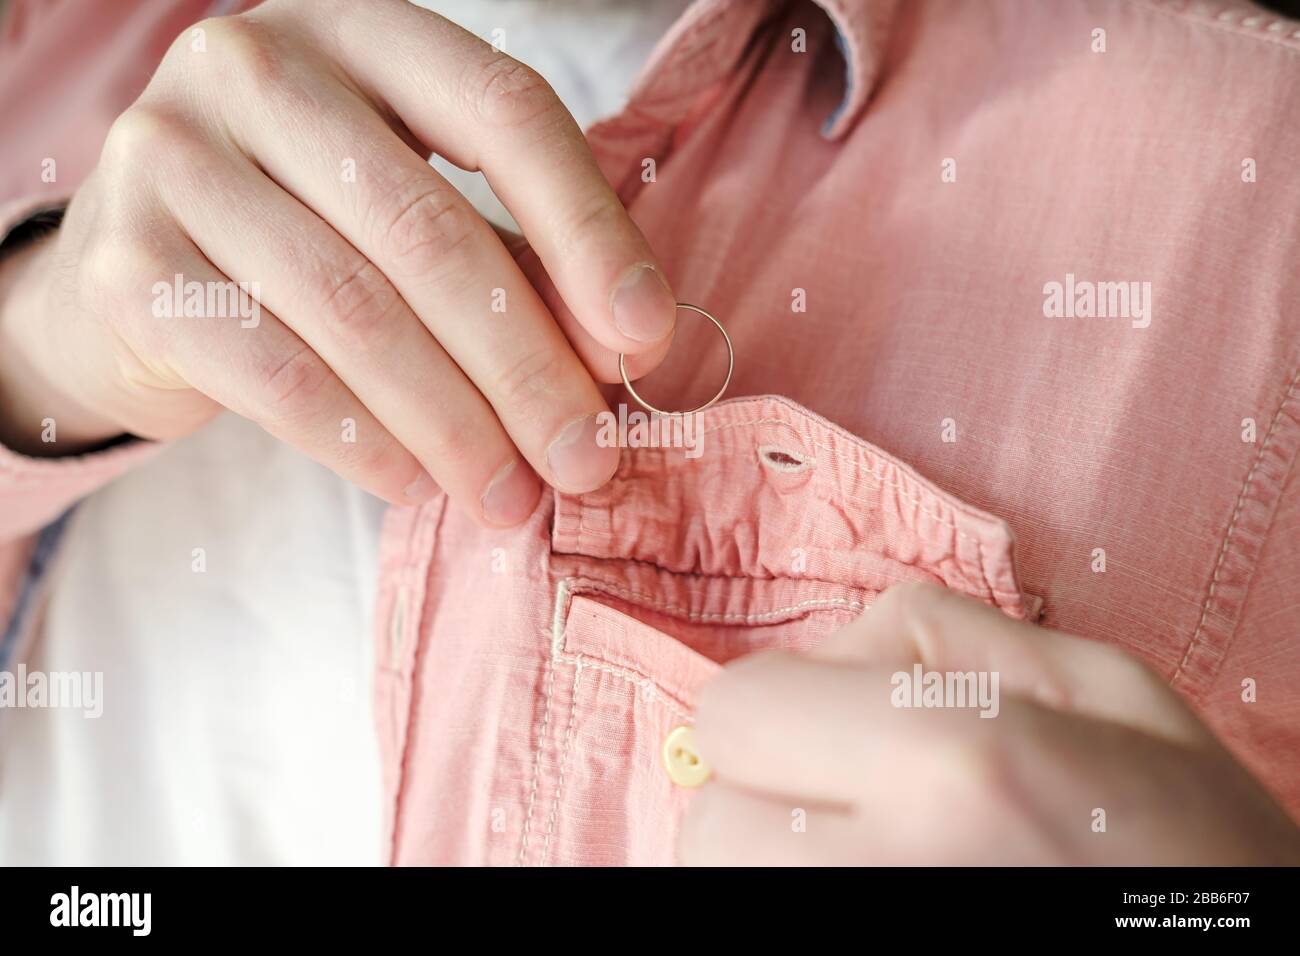 Hands of a man who took off a golden wedding ring and puts it in shirt pocket to hide his marital status from mistress. Stock Photo